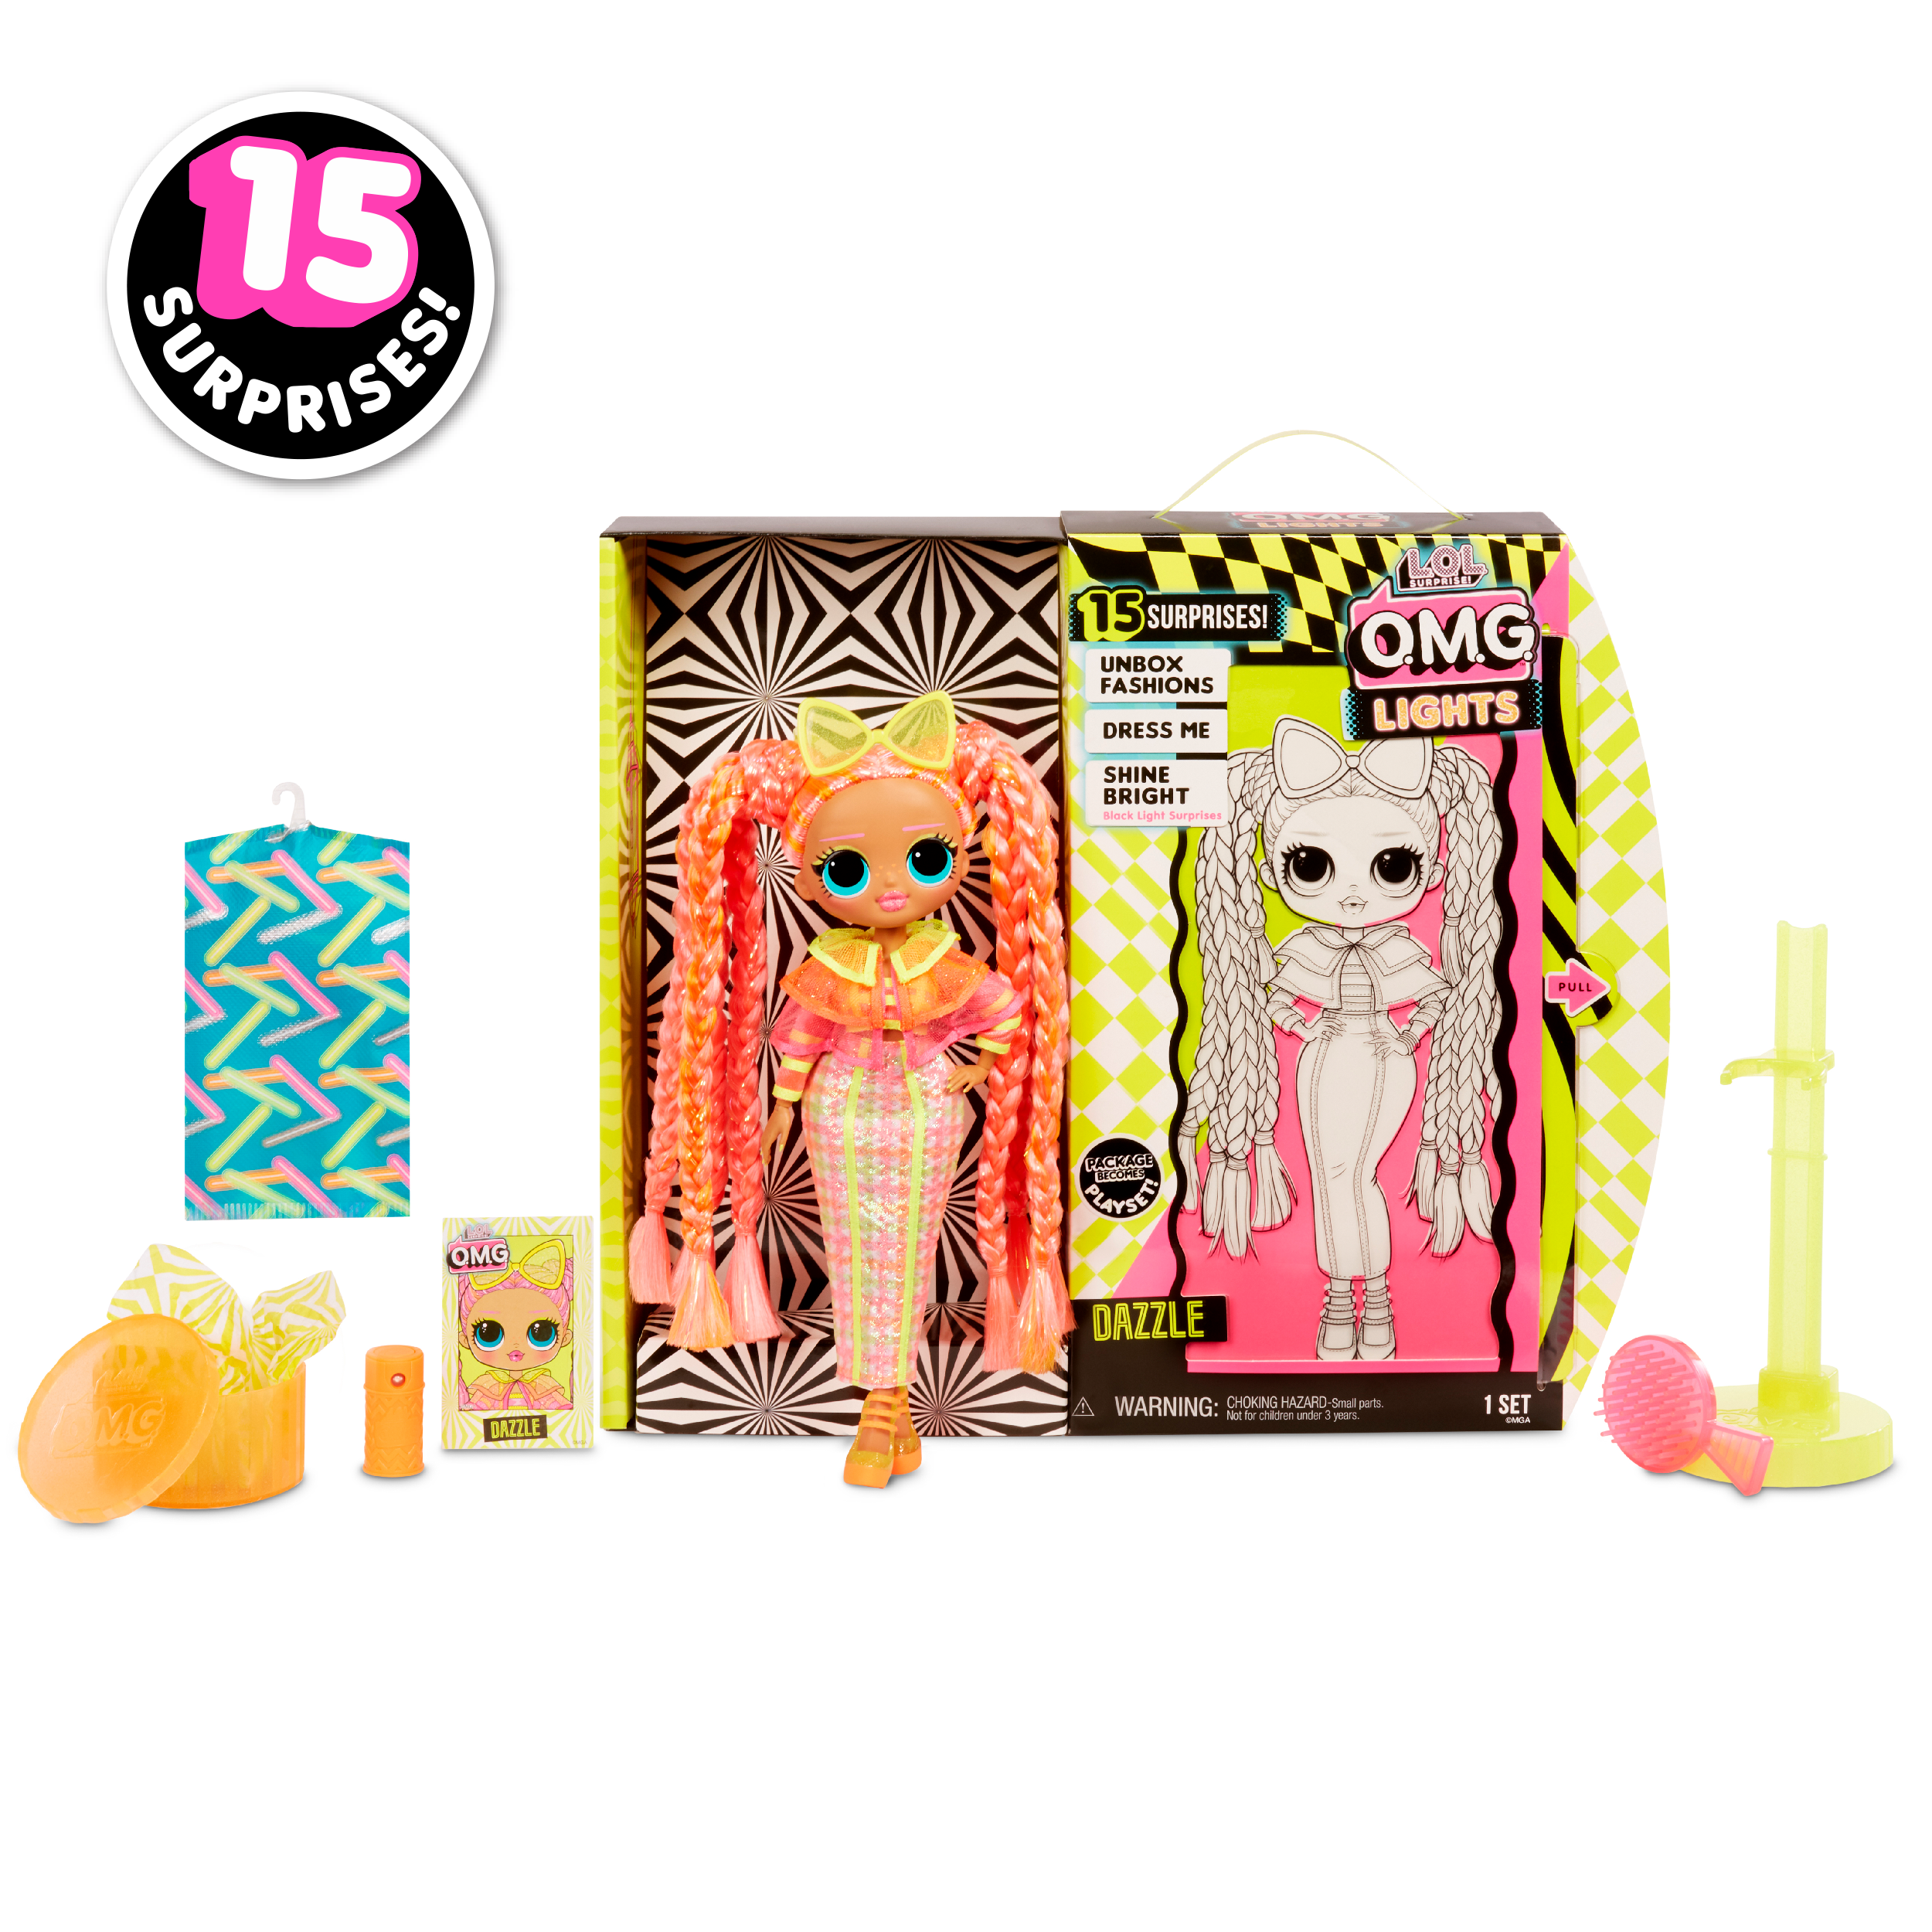 LOL Surprise OMG Lights Dazzle Fashion Doll With 15 Surprises including Outfit and Accessories - Toys for Girls Ages 4 5 6+ - image 5 of 7